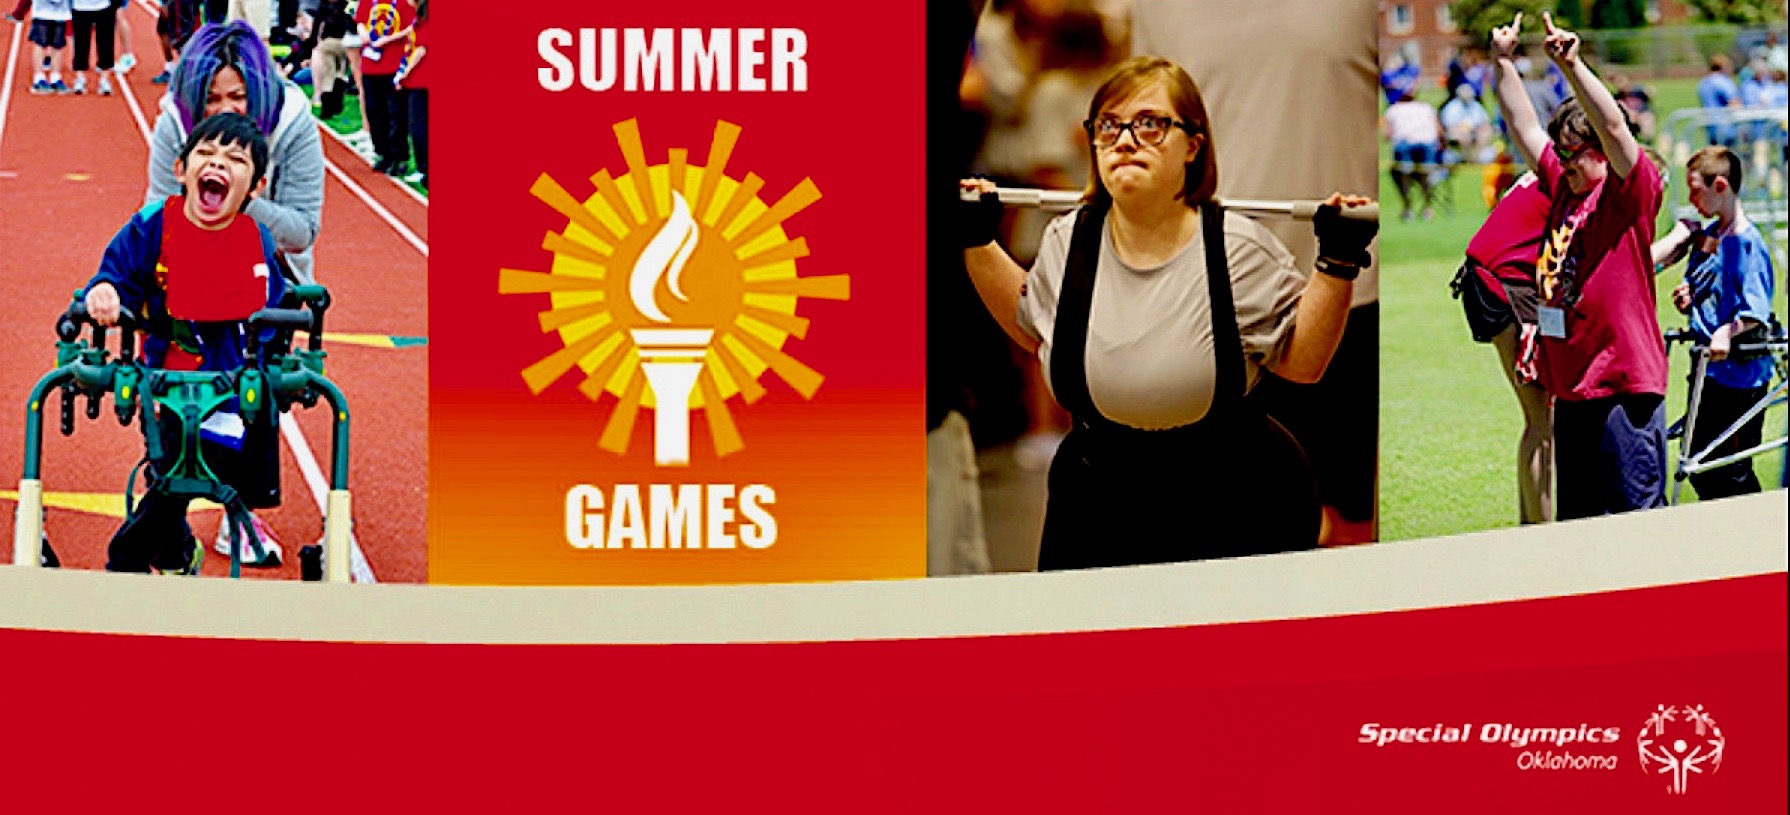 Oklahoma Summer Special Olympics photo collage and logo.